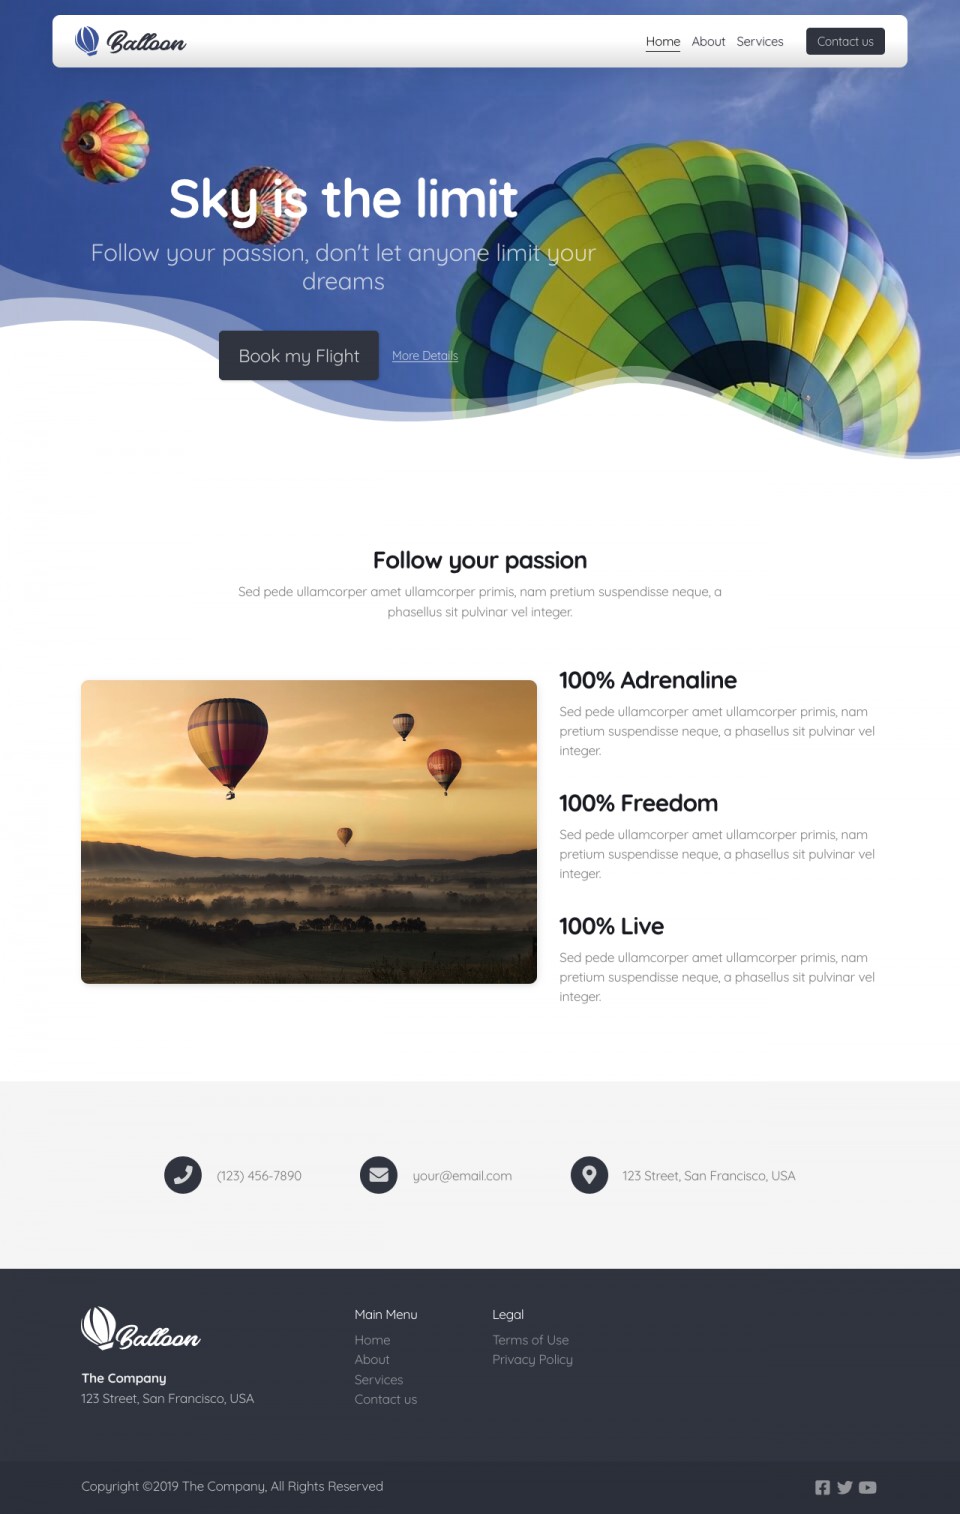 Balloon Website Template - Ideal for businesses in the travel, vacation, adventure, and trip industries